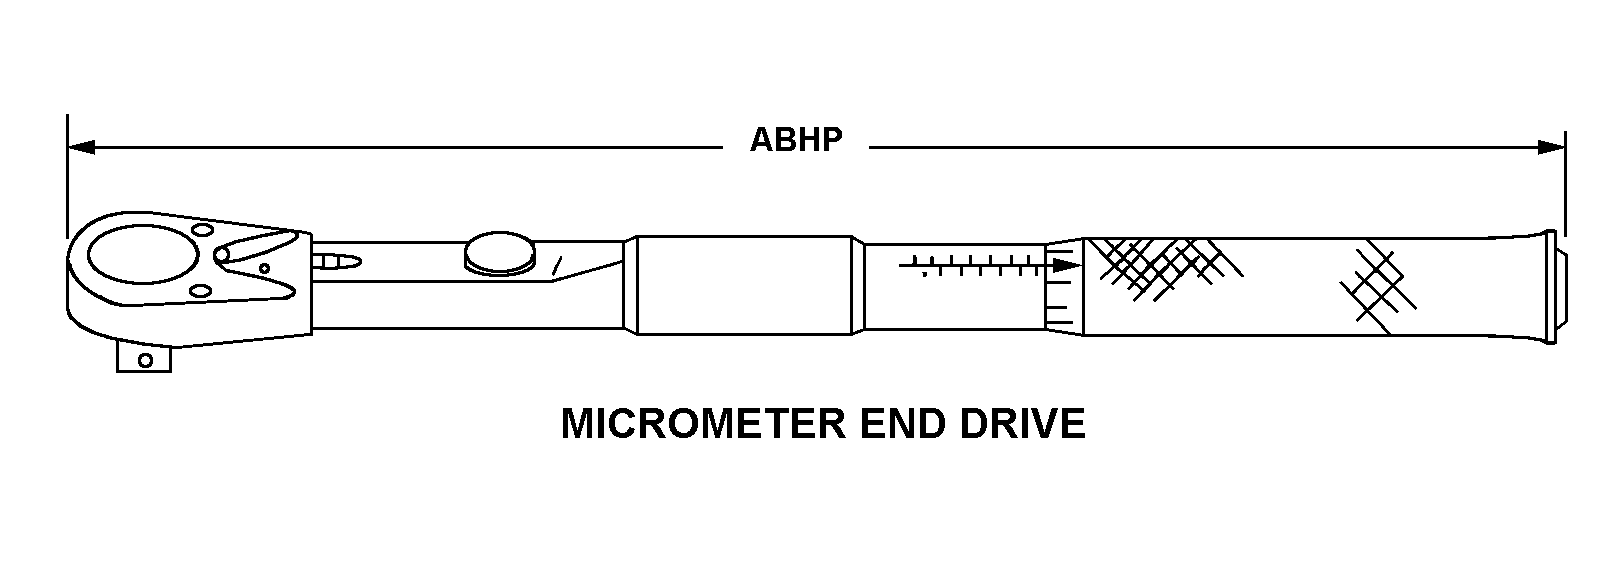 MICROMETER END DRIVE style nsn 5120-01-596-9430